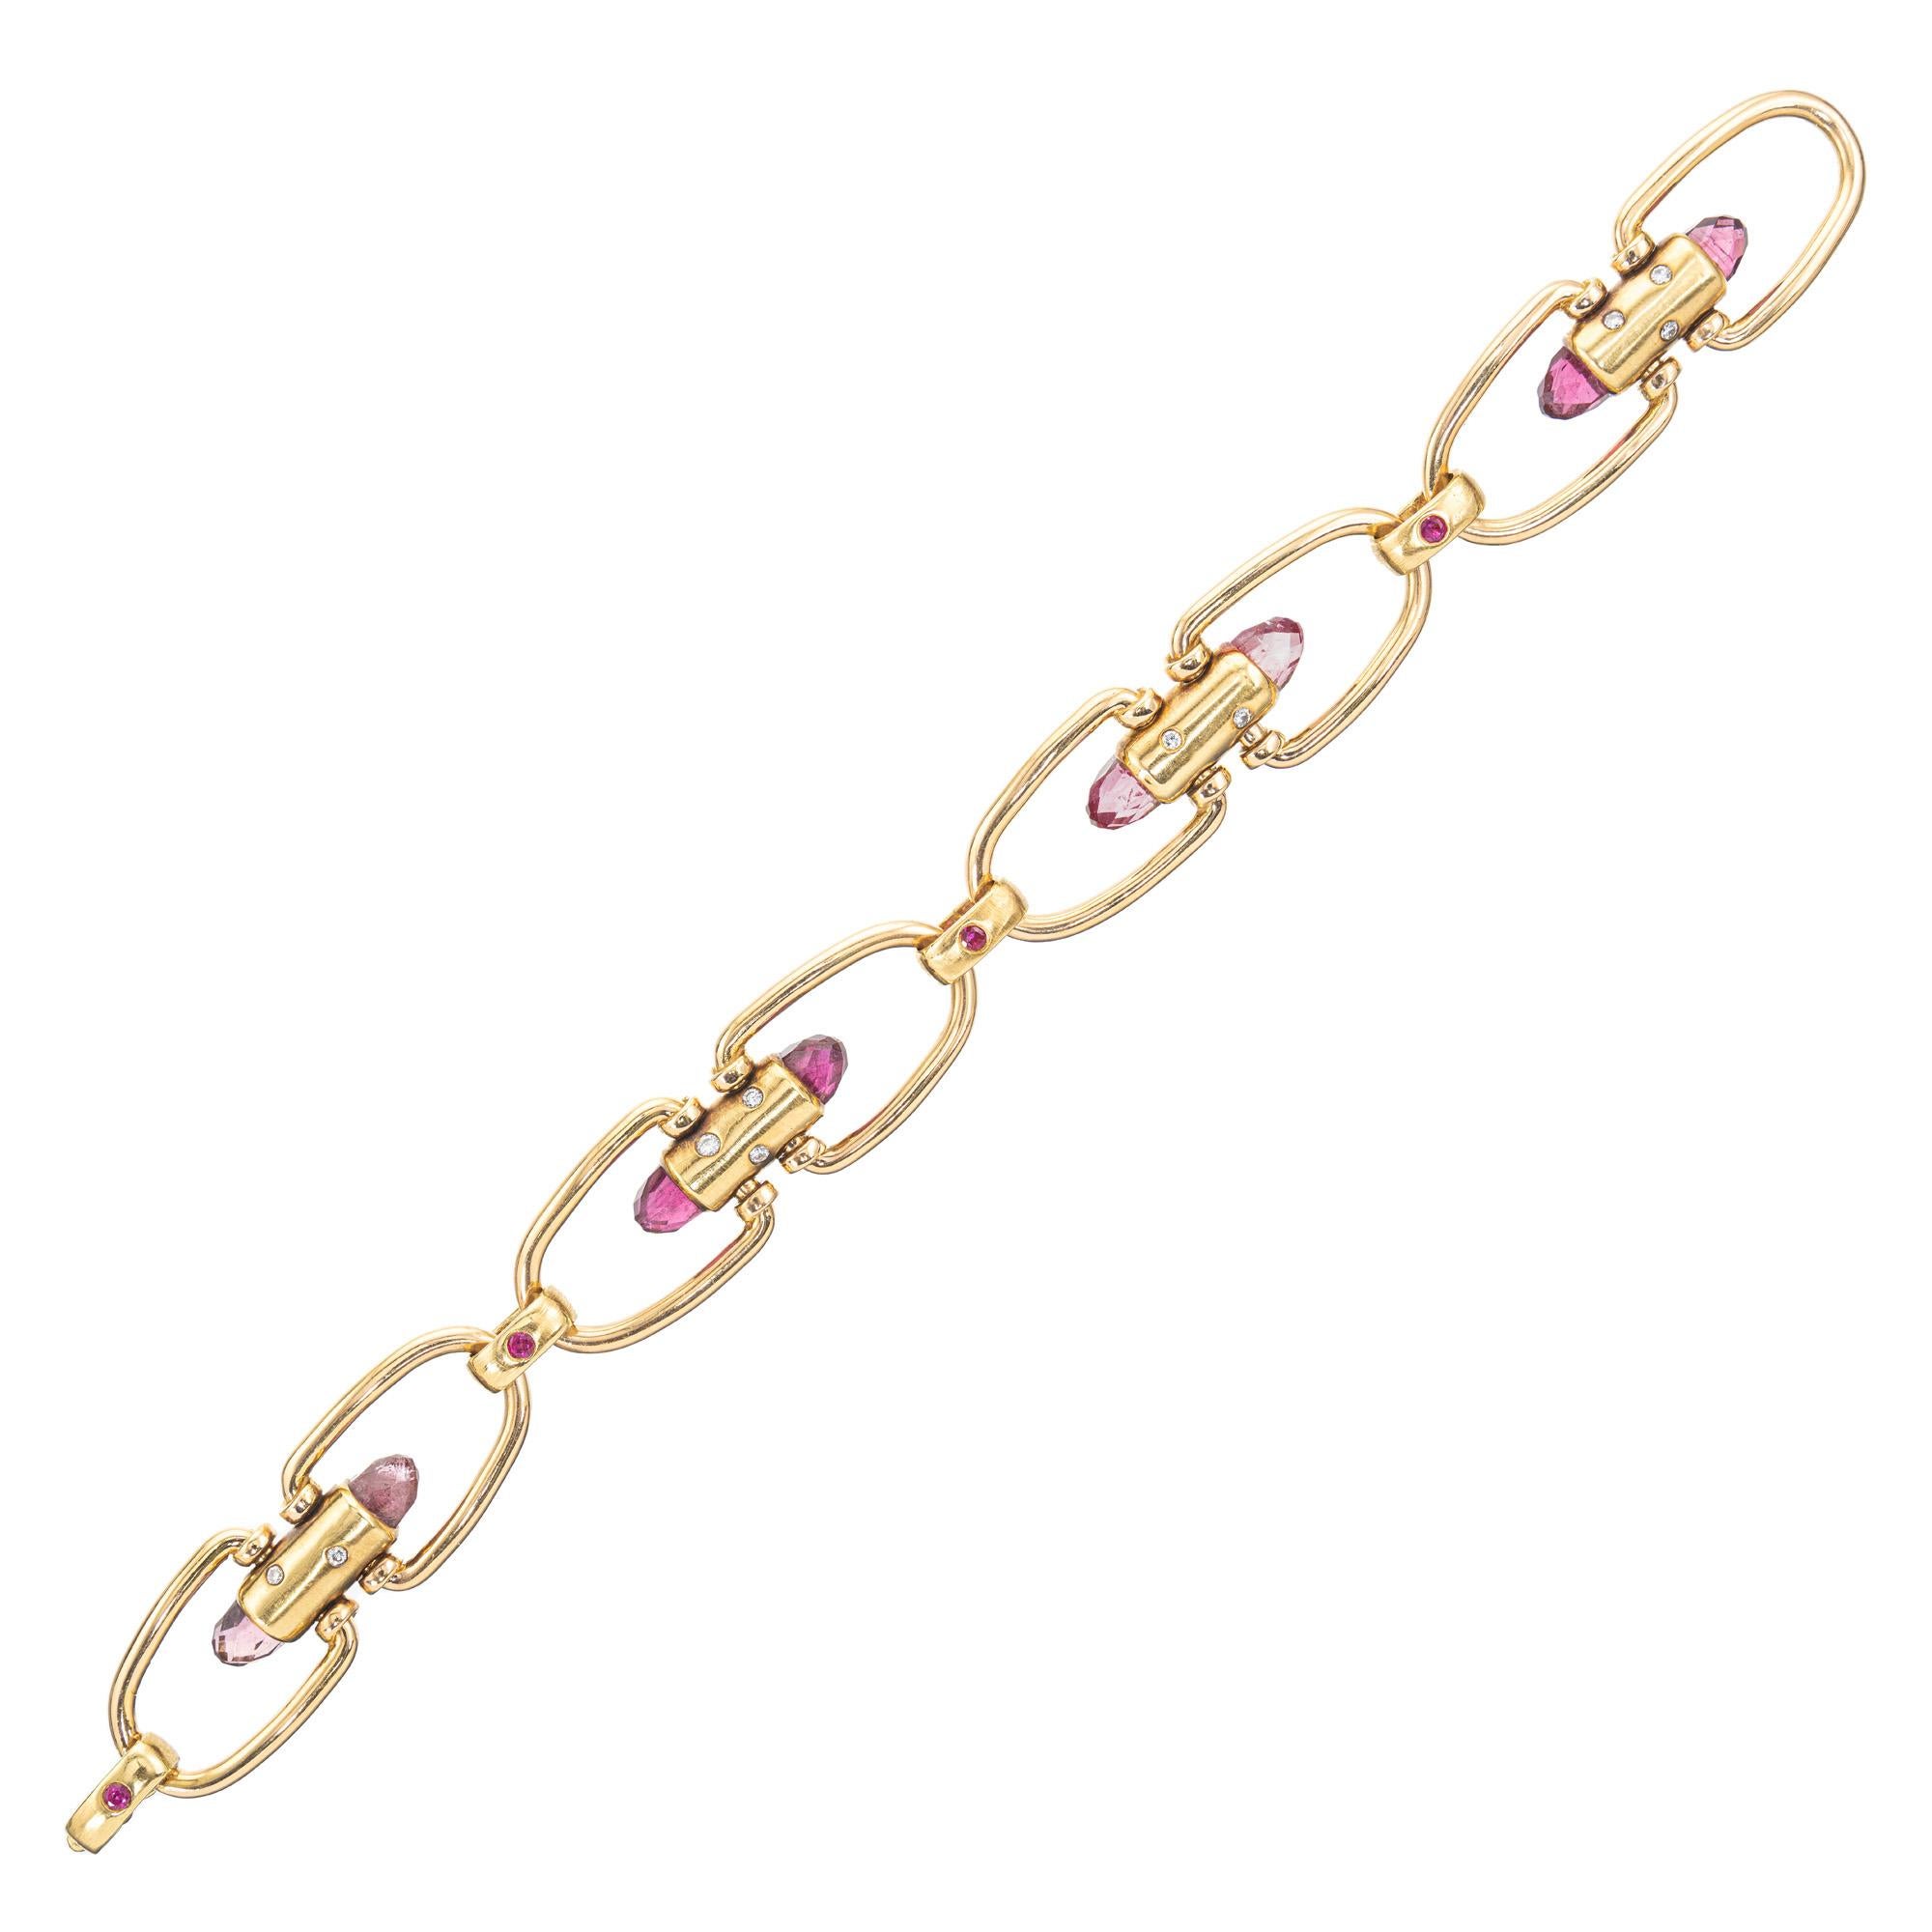 Pink Briolette Tourmaline Ruby Diamond rose gold link bracelet, a truly exquisite piece. This bracelet is a harmonious blend of delicate pink tourmaline, ruby and round diamonds, all set in lustrous 18k rose gold tubes and links. The design features